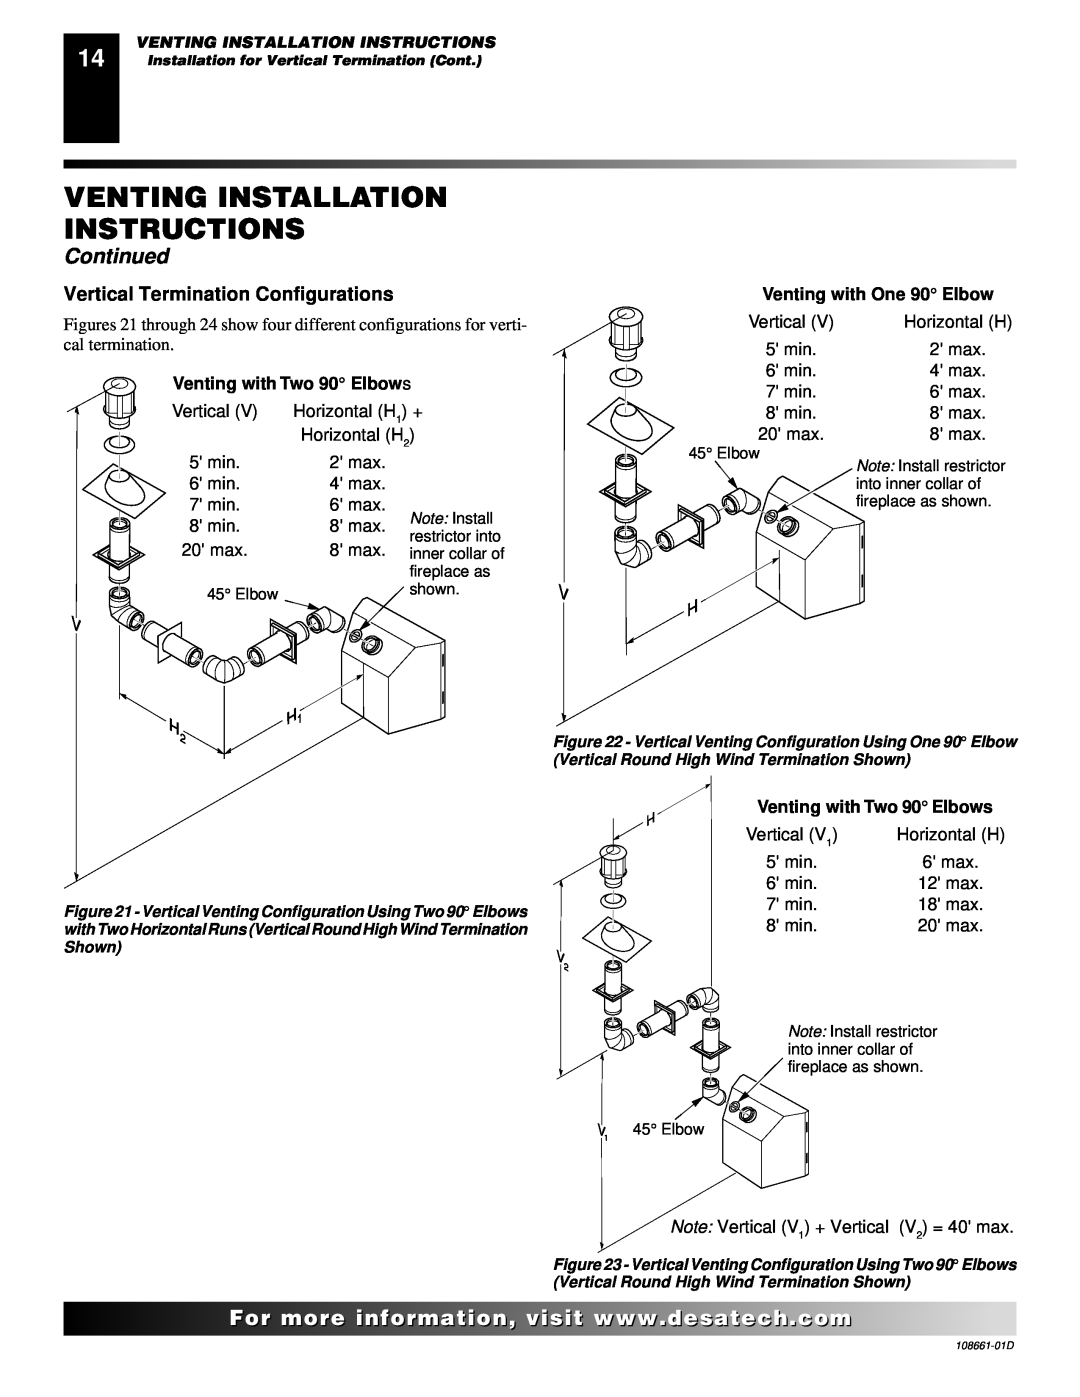 Desa CTDV36NR Venting Installation Instructions, Continued, Vertical Termination Configurations, Venting with One 90 Elbow 